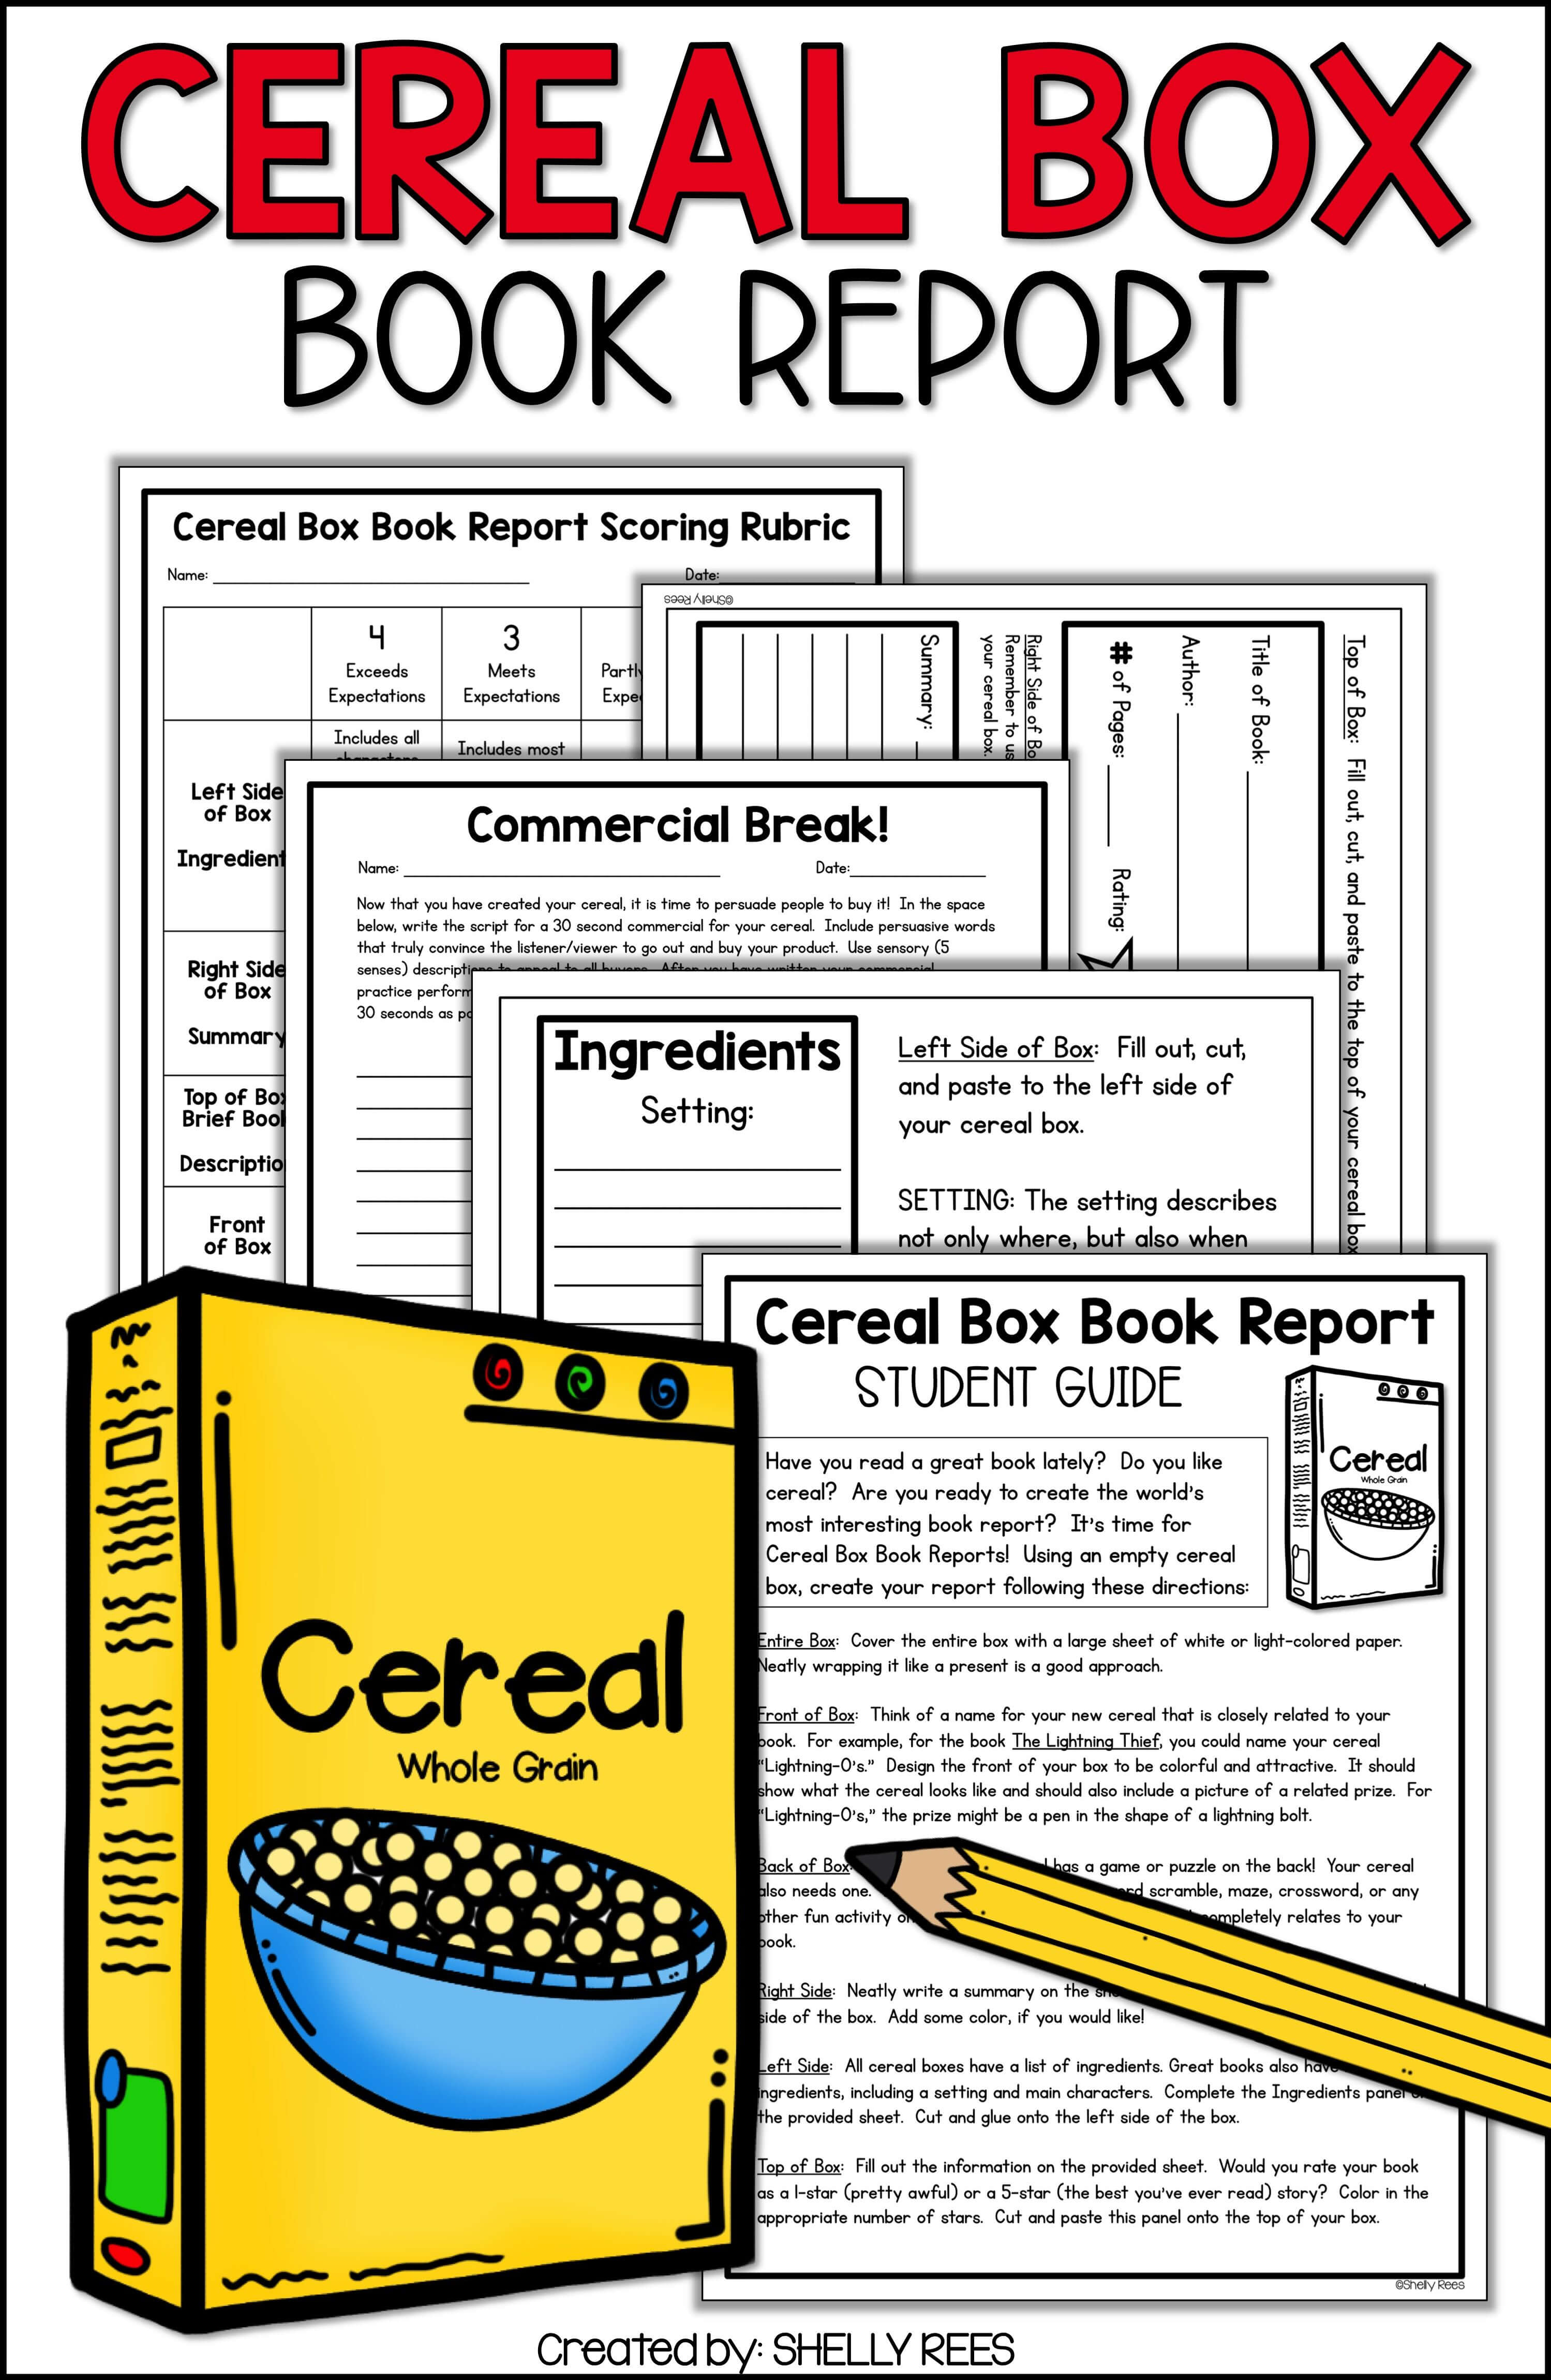 Cereal Box Book Report Kit | Shelly Rees Teaching Resources With Cereal Box Book Report Template